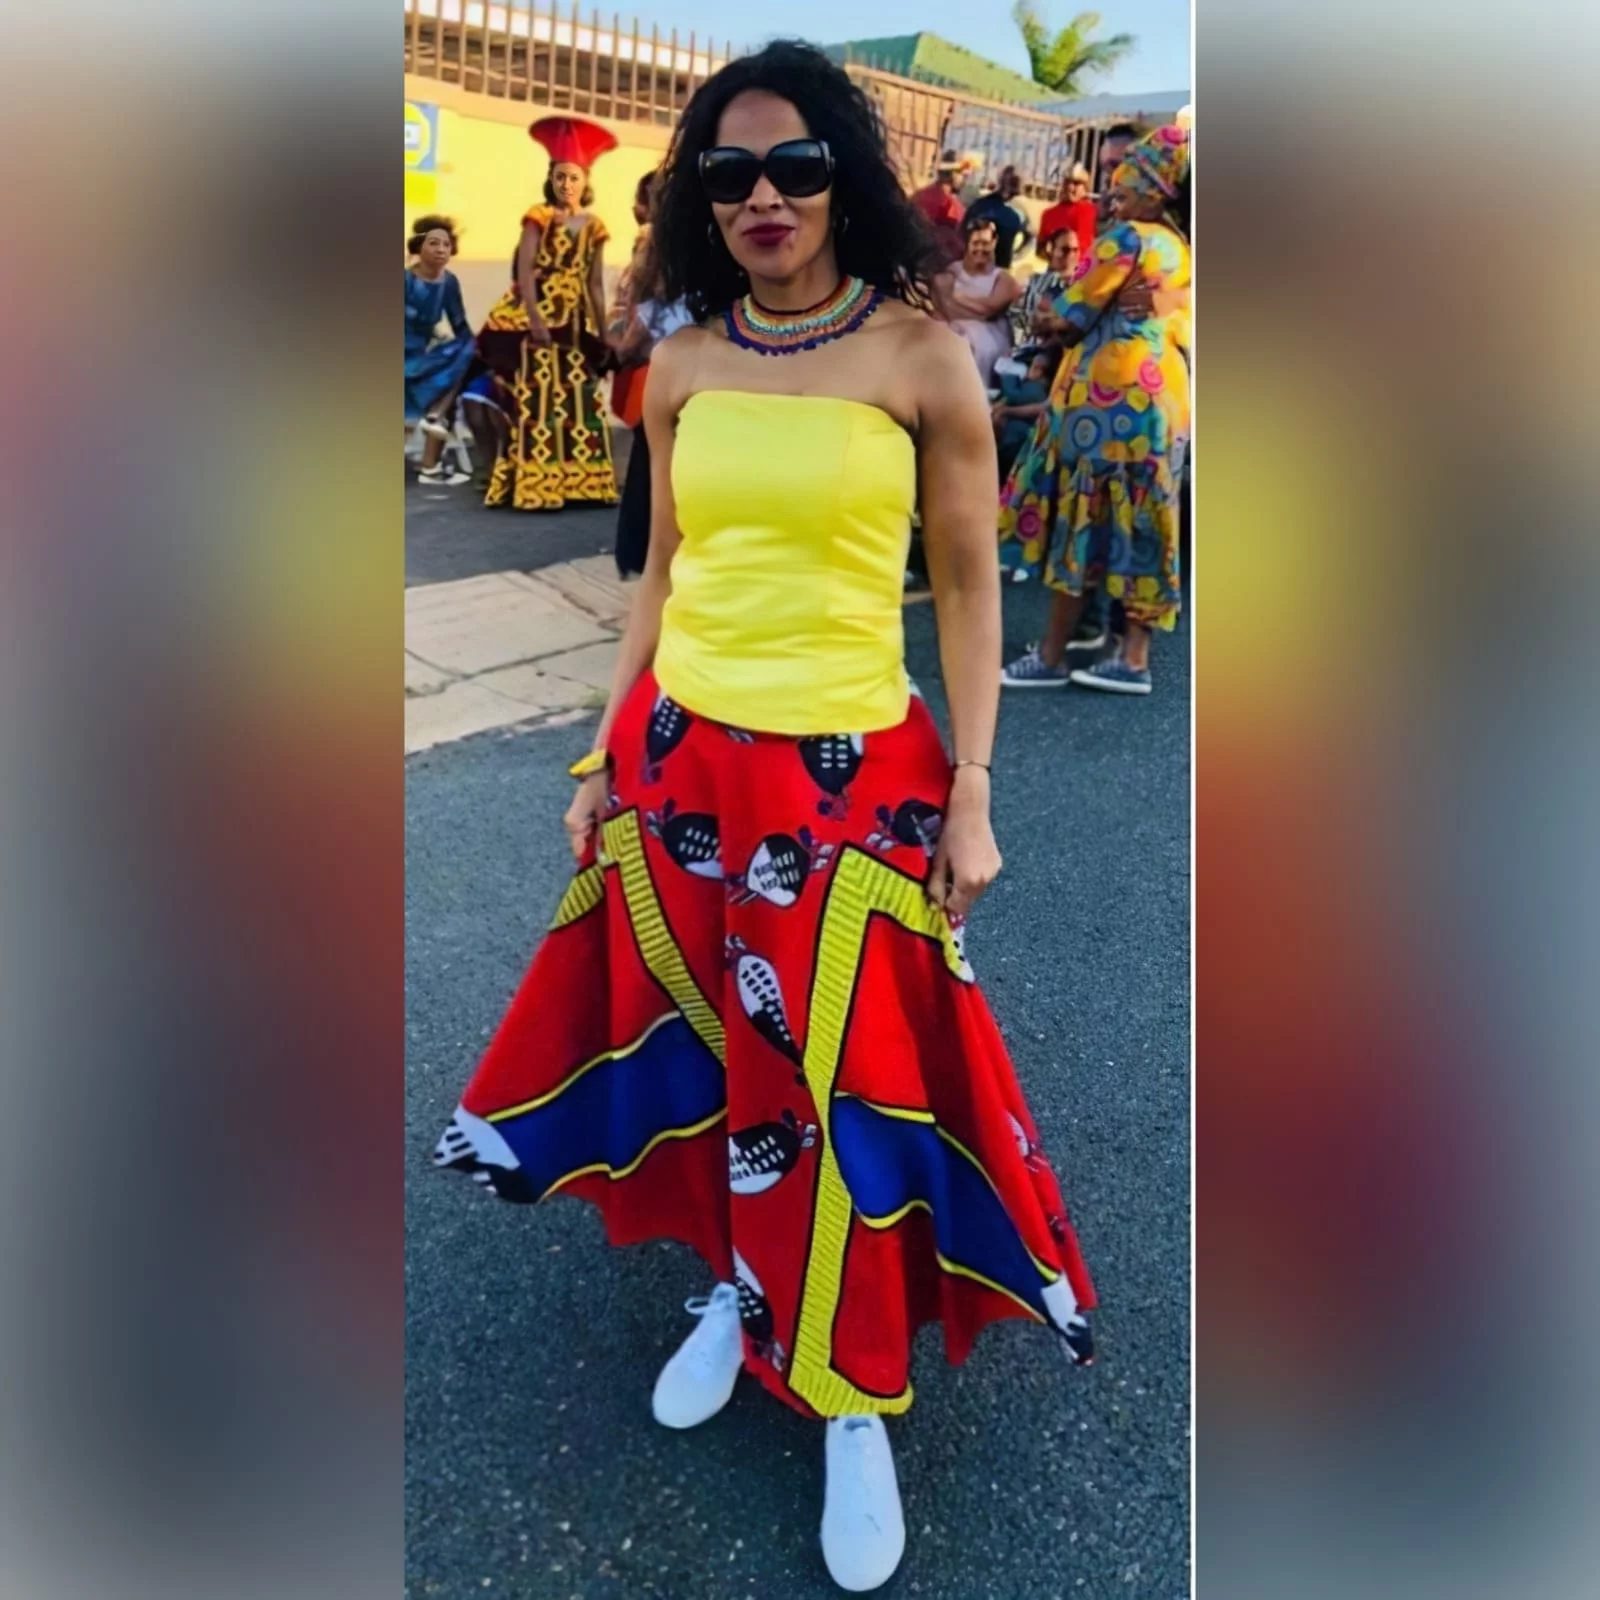 African traditional 2 piece outfit skirt and top 1 african traditional 2 piece outfit skirt and top. Red swati wide skirt with a high waisted effect. Boobtube yellow satin top with a lace-up back